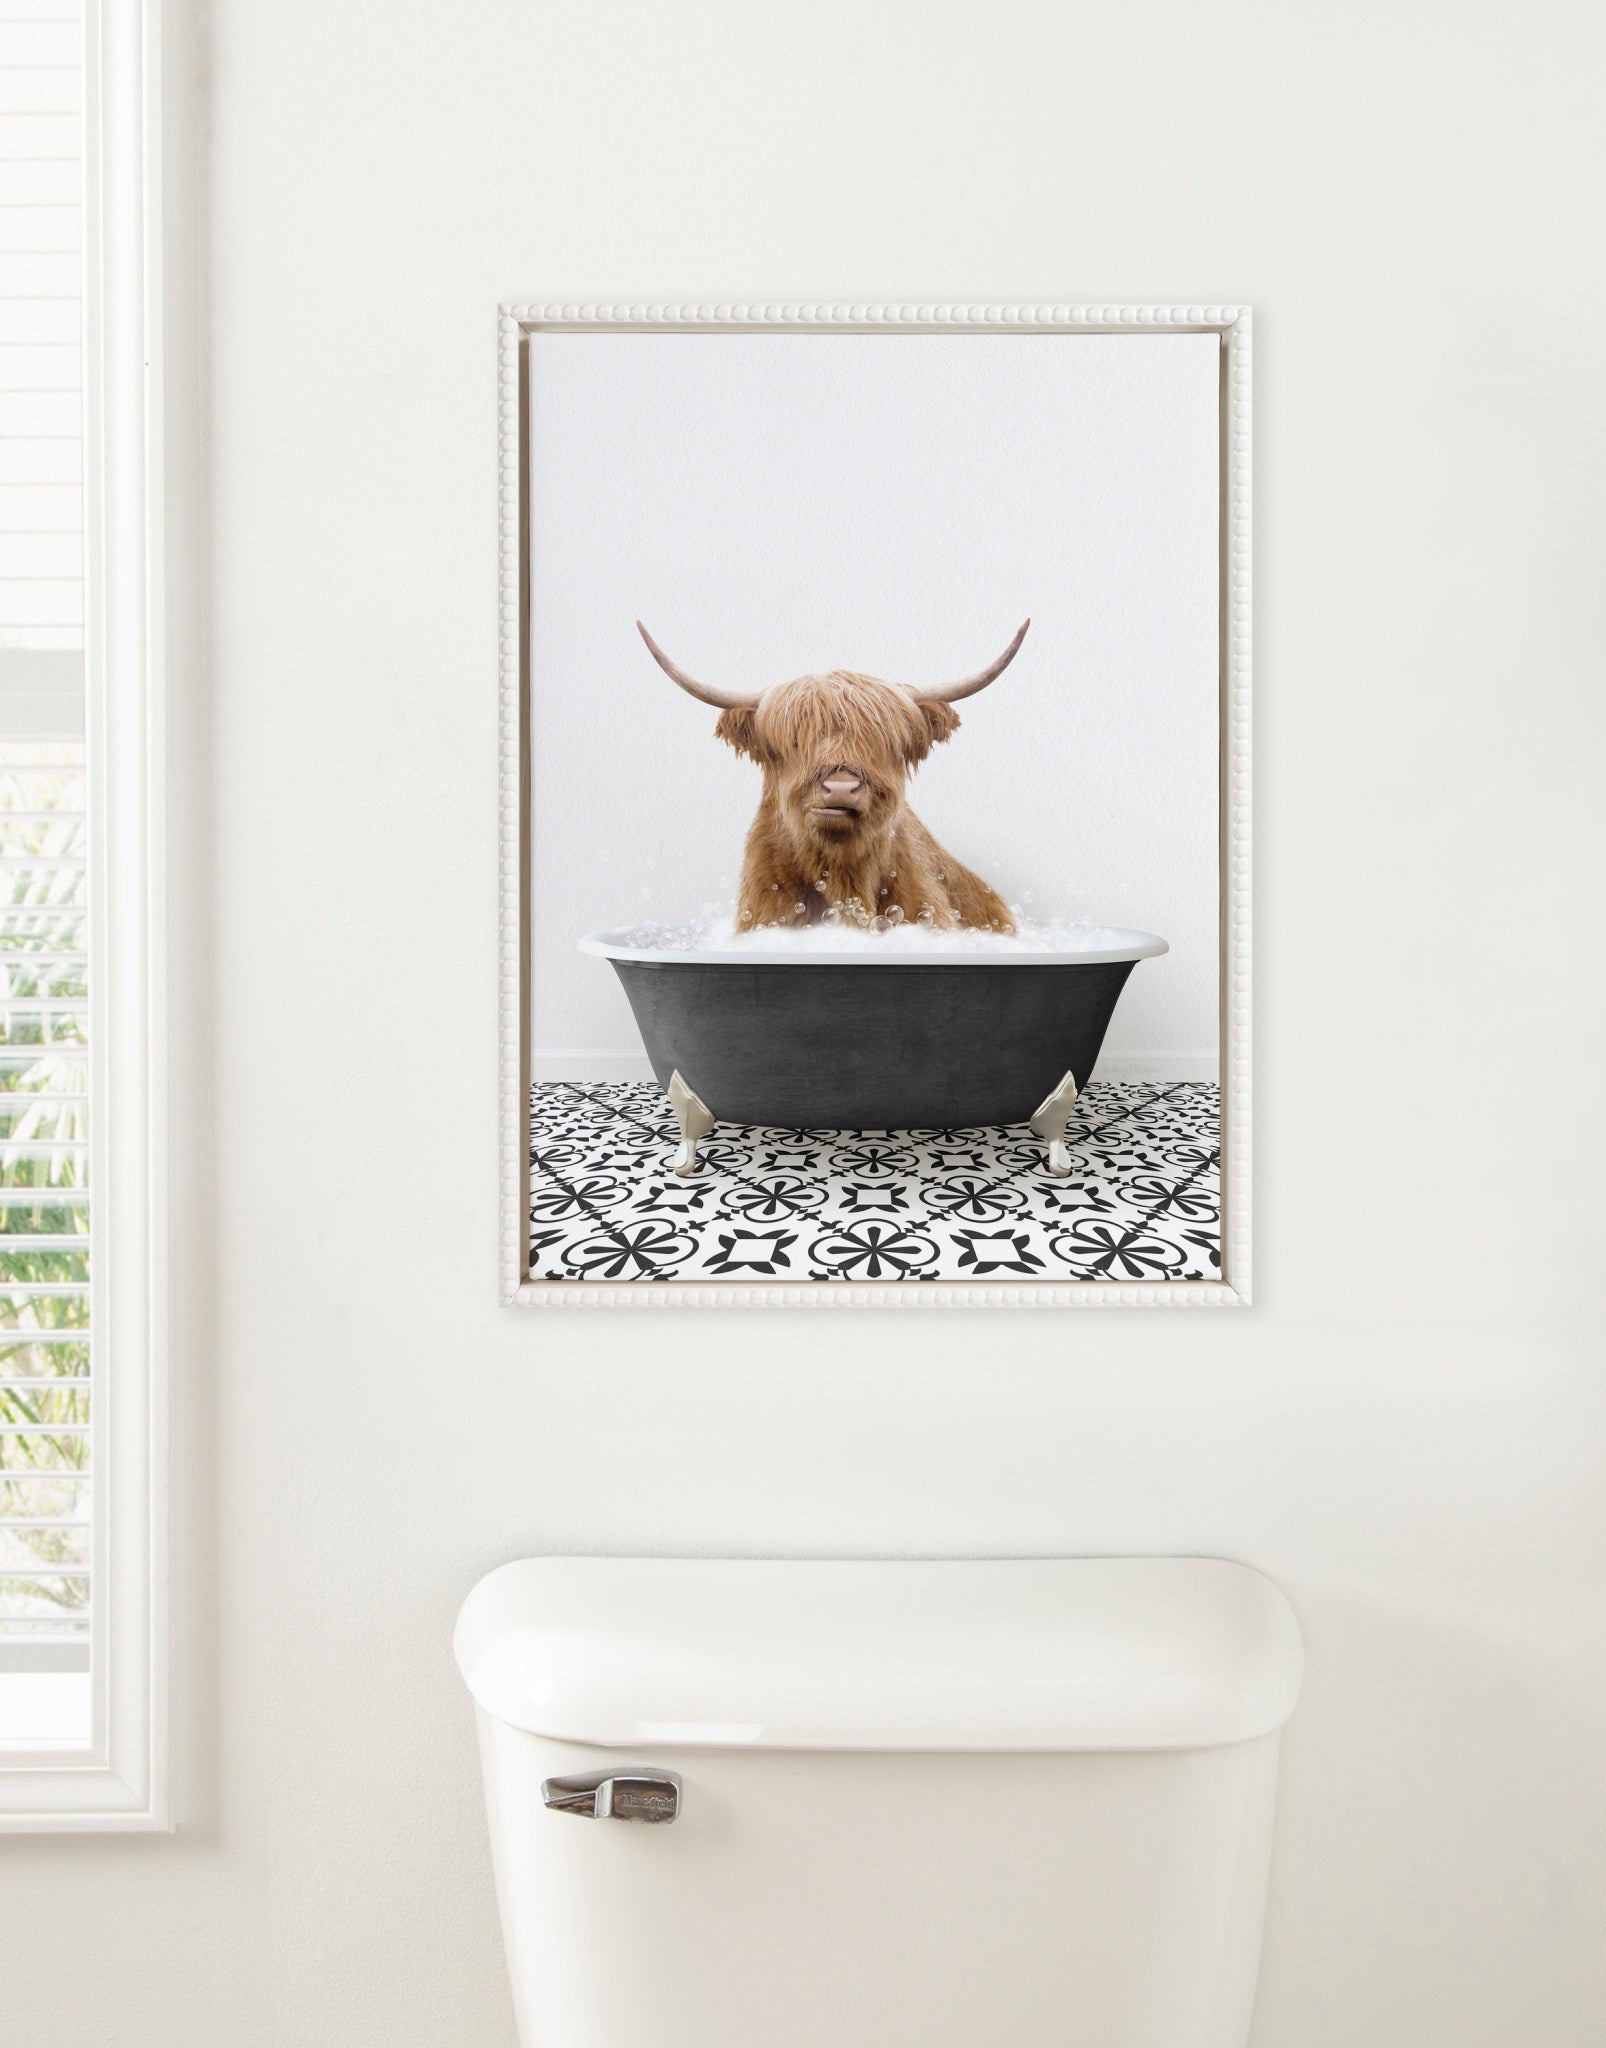 Sylvie Beaded Highland Cow in Black and White Stencil Bath Framed Canvas by Amy Peterson